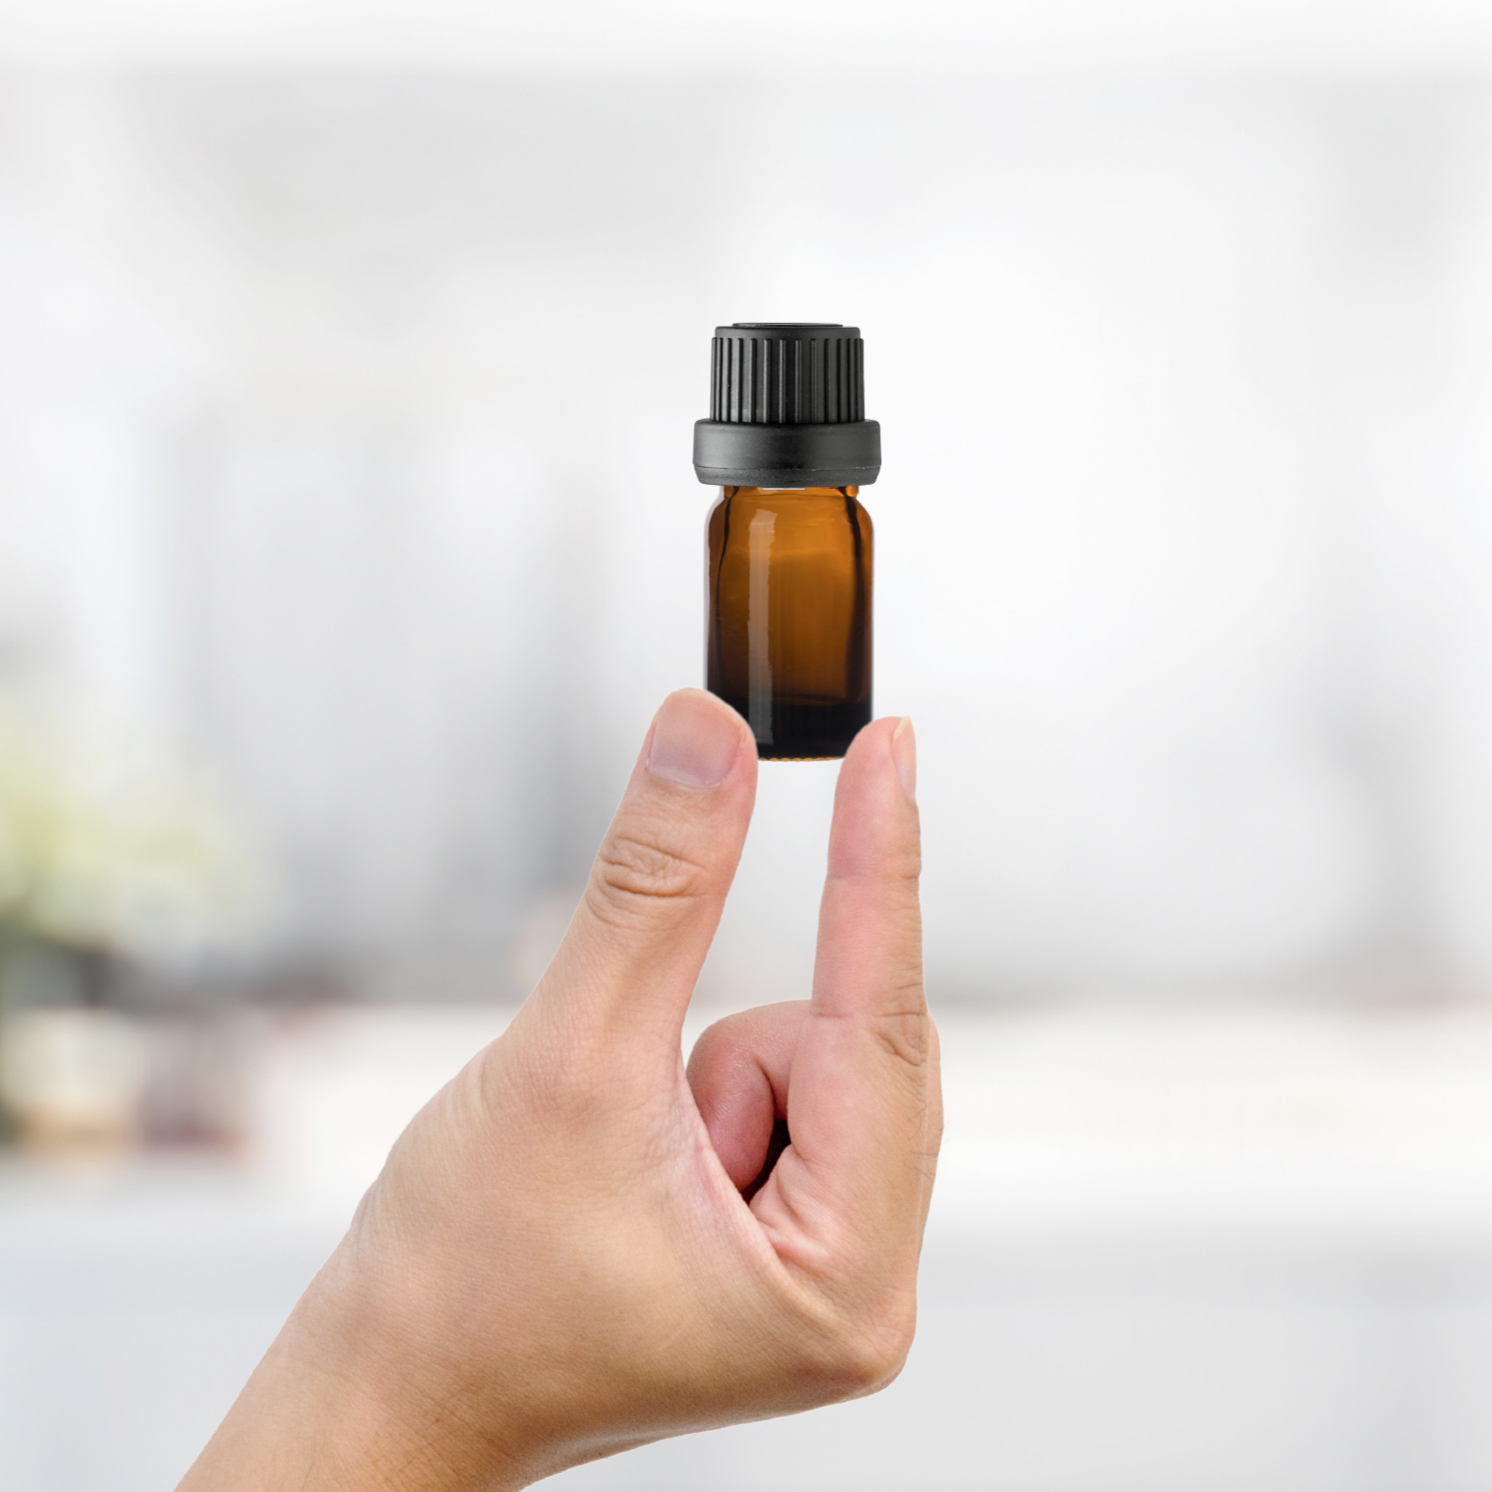 Food Grade Essential Oils Don't Exist: Don't Be Fooled By These Lies – Mom  Prepares